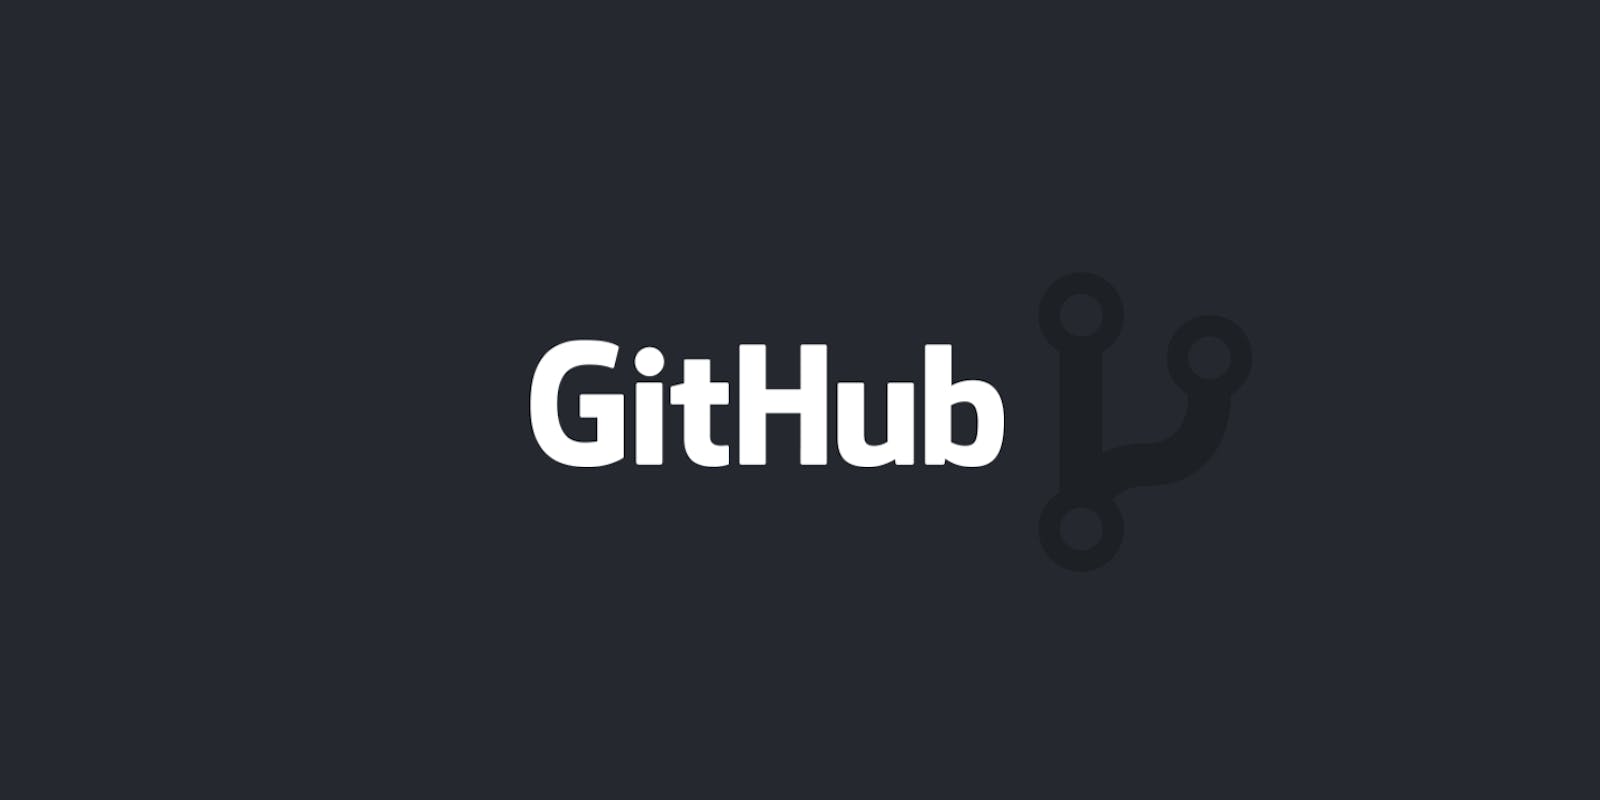 GitHub -  Hive and the Power of Collaboration